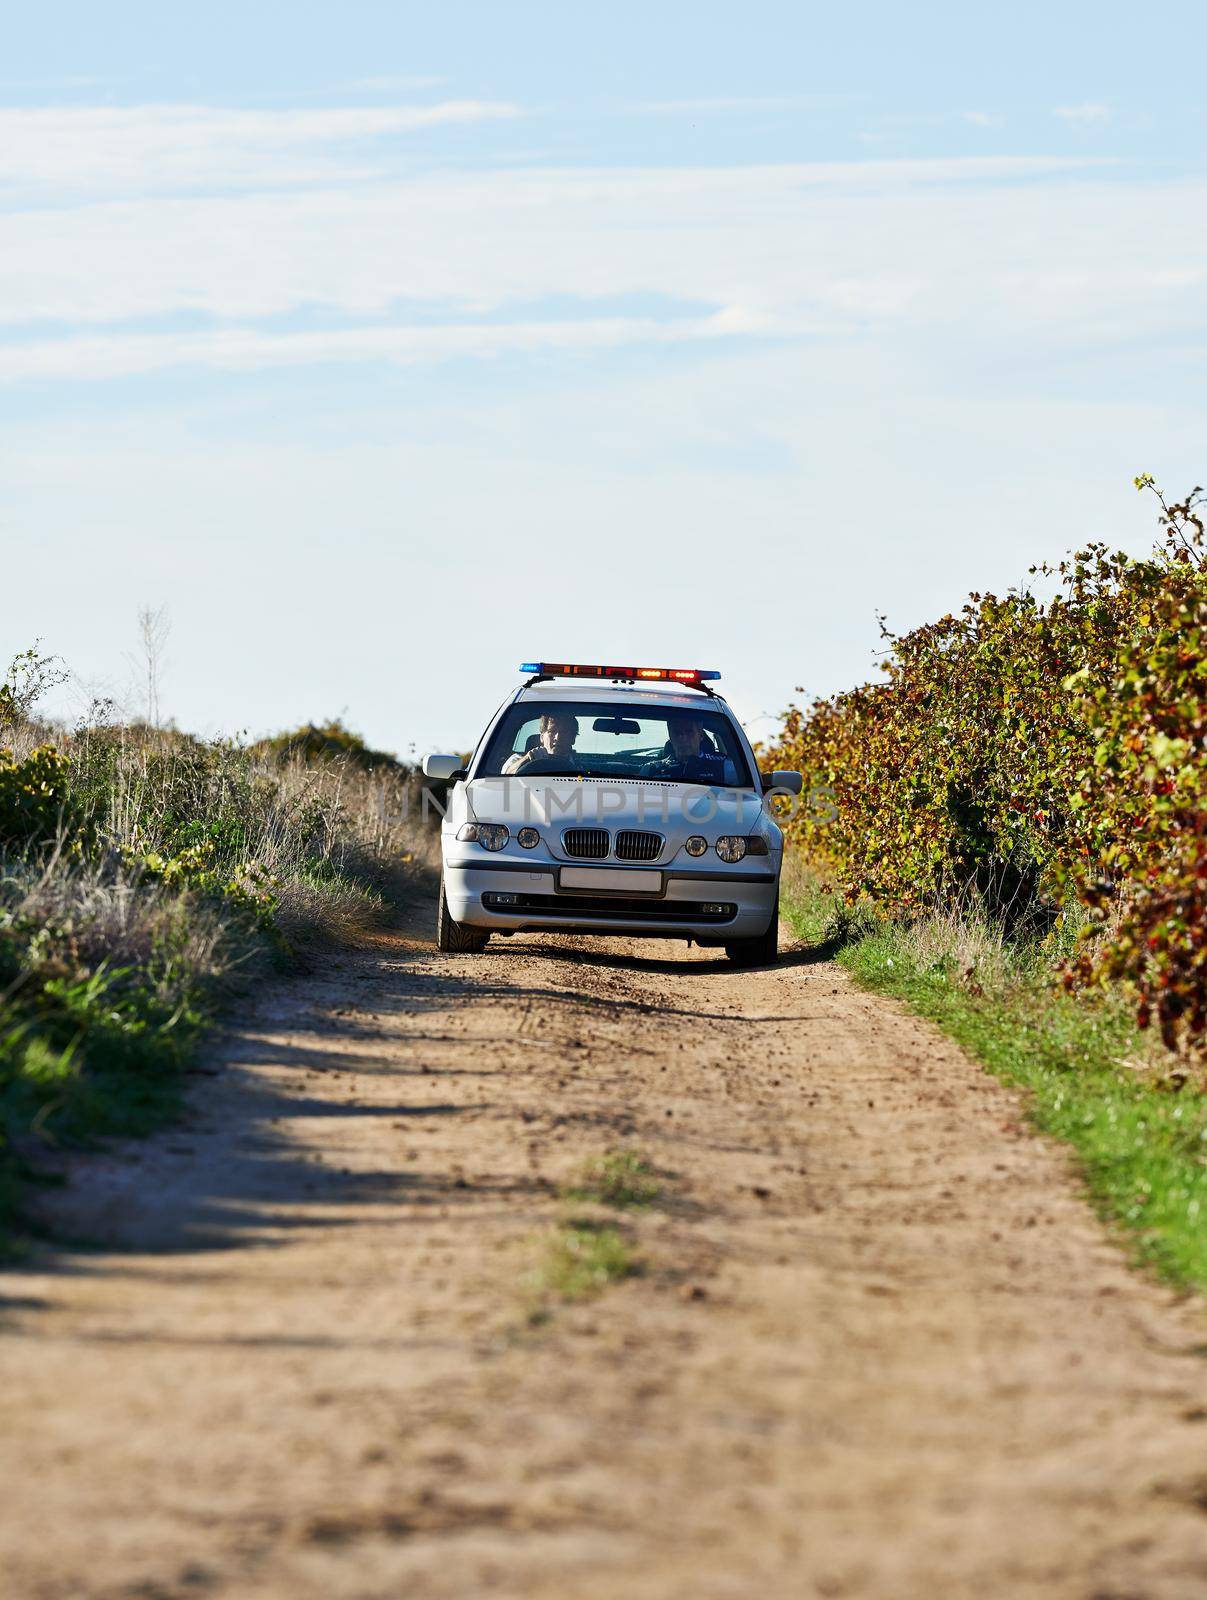 Shot of a police car driving down a dirt road.